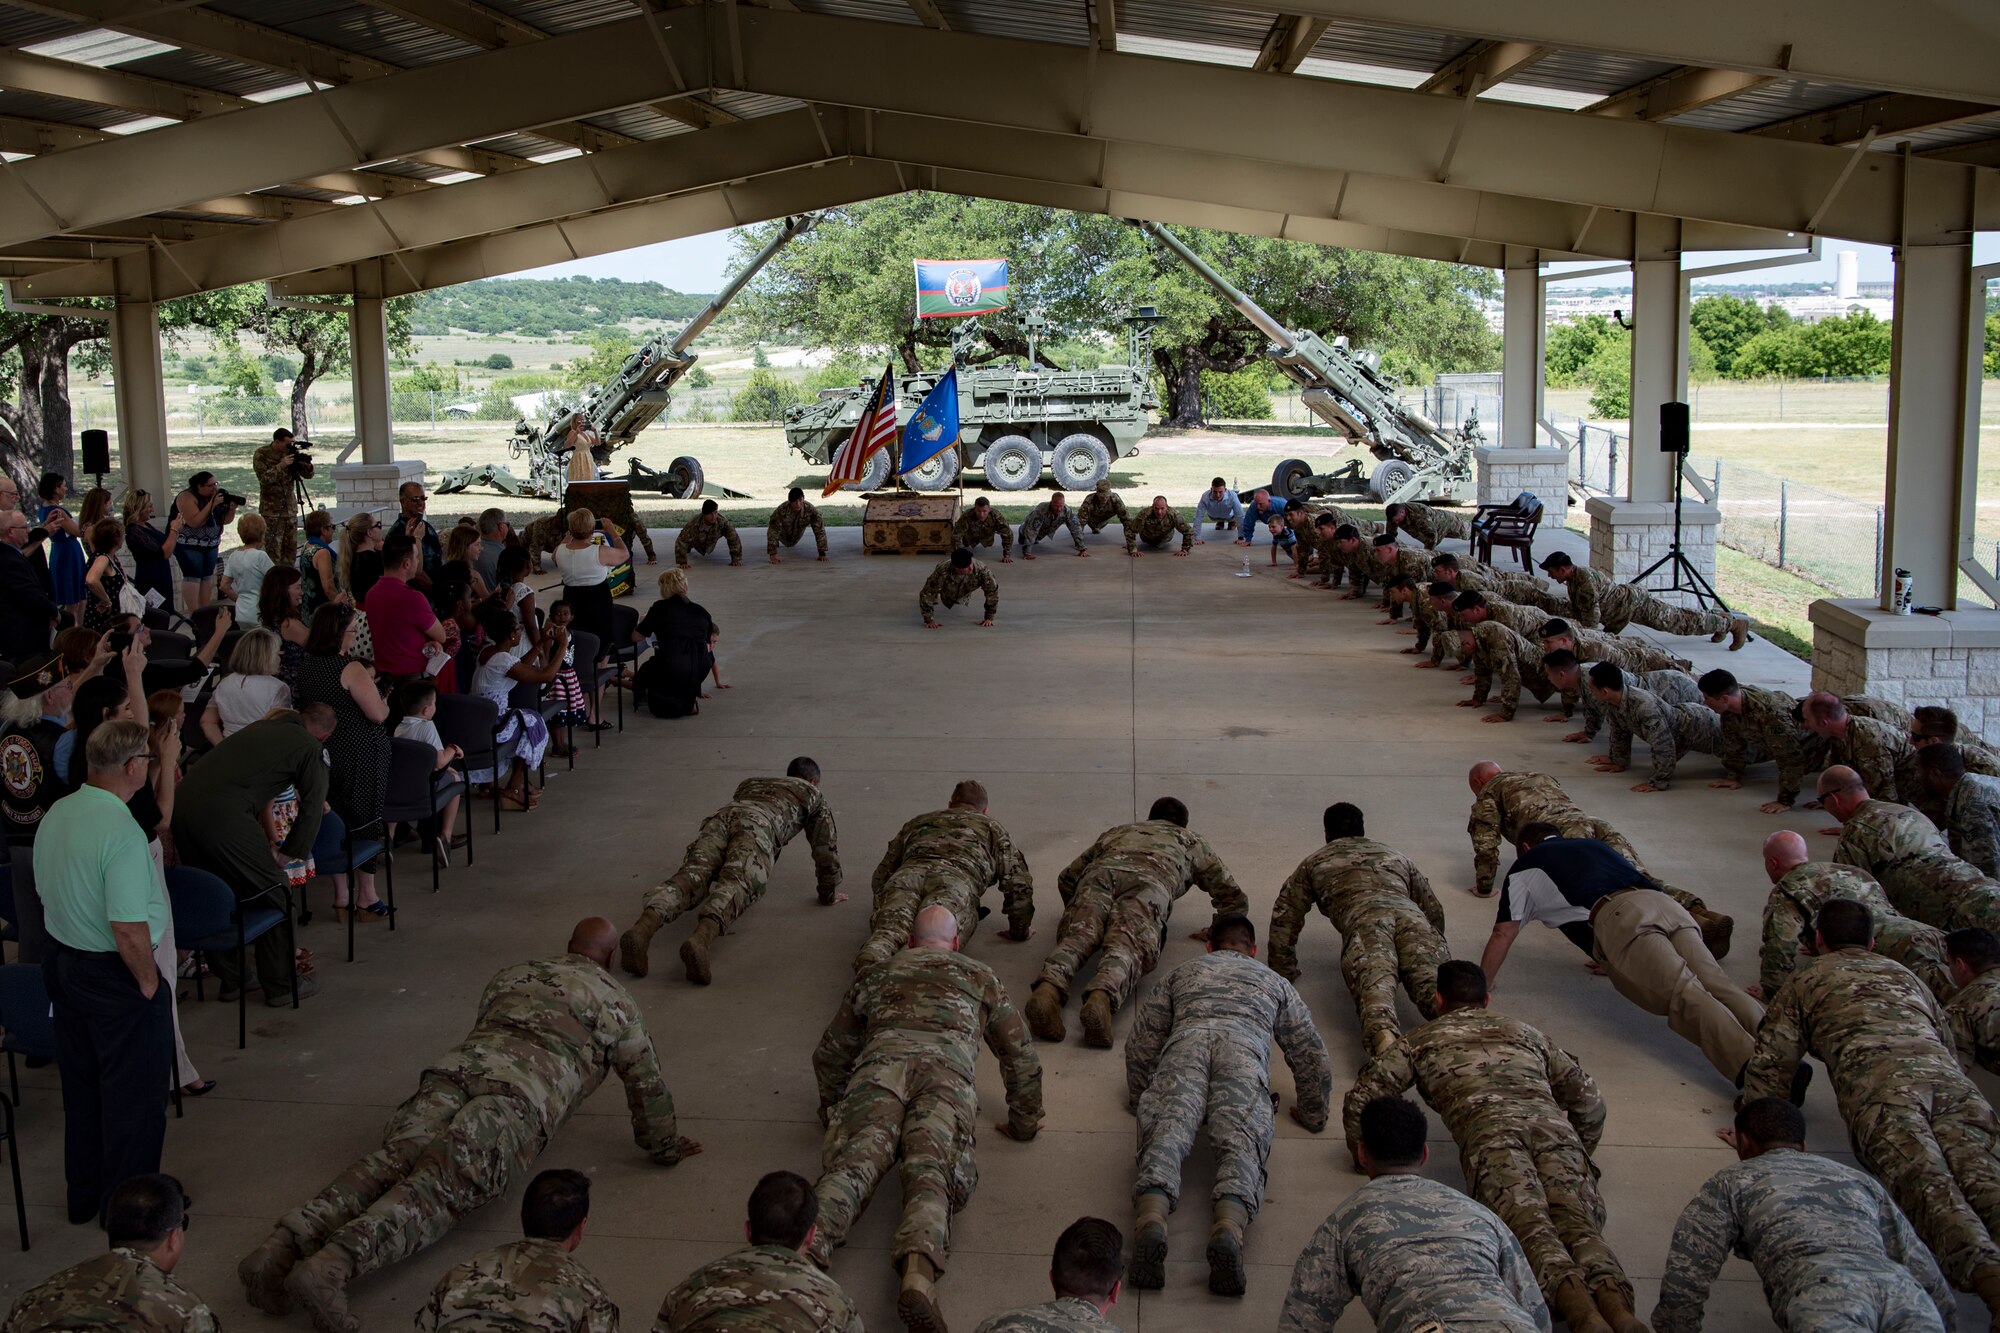 Past and present members of the 11th Air Support Operations Squadron perform memorial pushups during a squadron inactivation ceremony, June 21, 2018, at Fort Hood, Texas. As a part of the 93d Air Ground Operations Wing from Moody Air Force Base, Ga., the 11th ASOS ‘Steel Eagles’ mission will remain unchanged as they continue to support Ft. Hood and absorb into the 9th ASOS. The enhanced 9th ASOS will continue to provide tactical air support to align with any U.S. Army unit that needs air support for their scheme of maneuver. (U.S. Air Force photo by Senior Airman Daniel Snider)